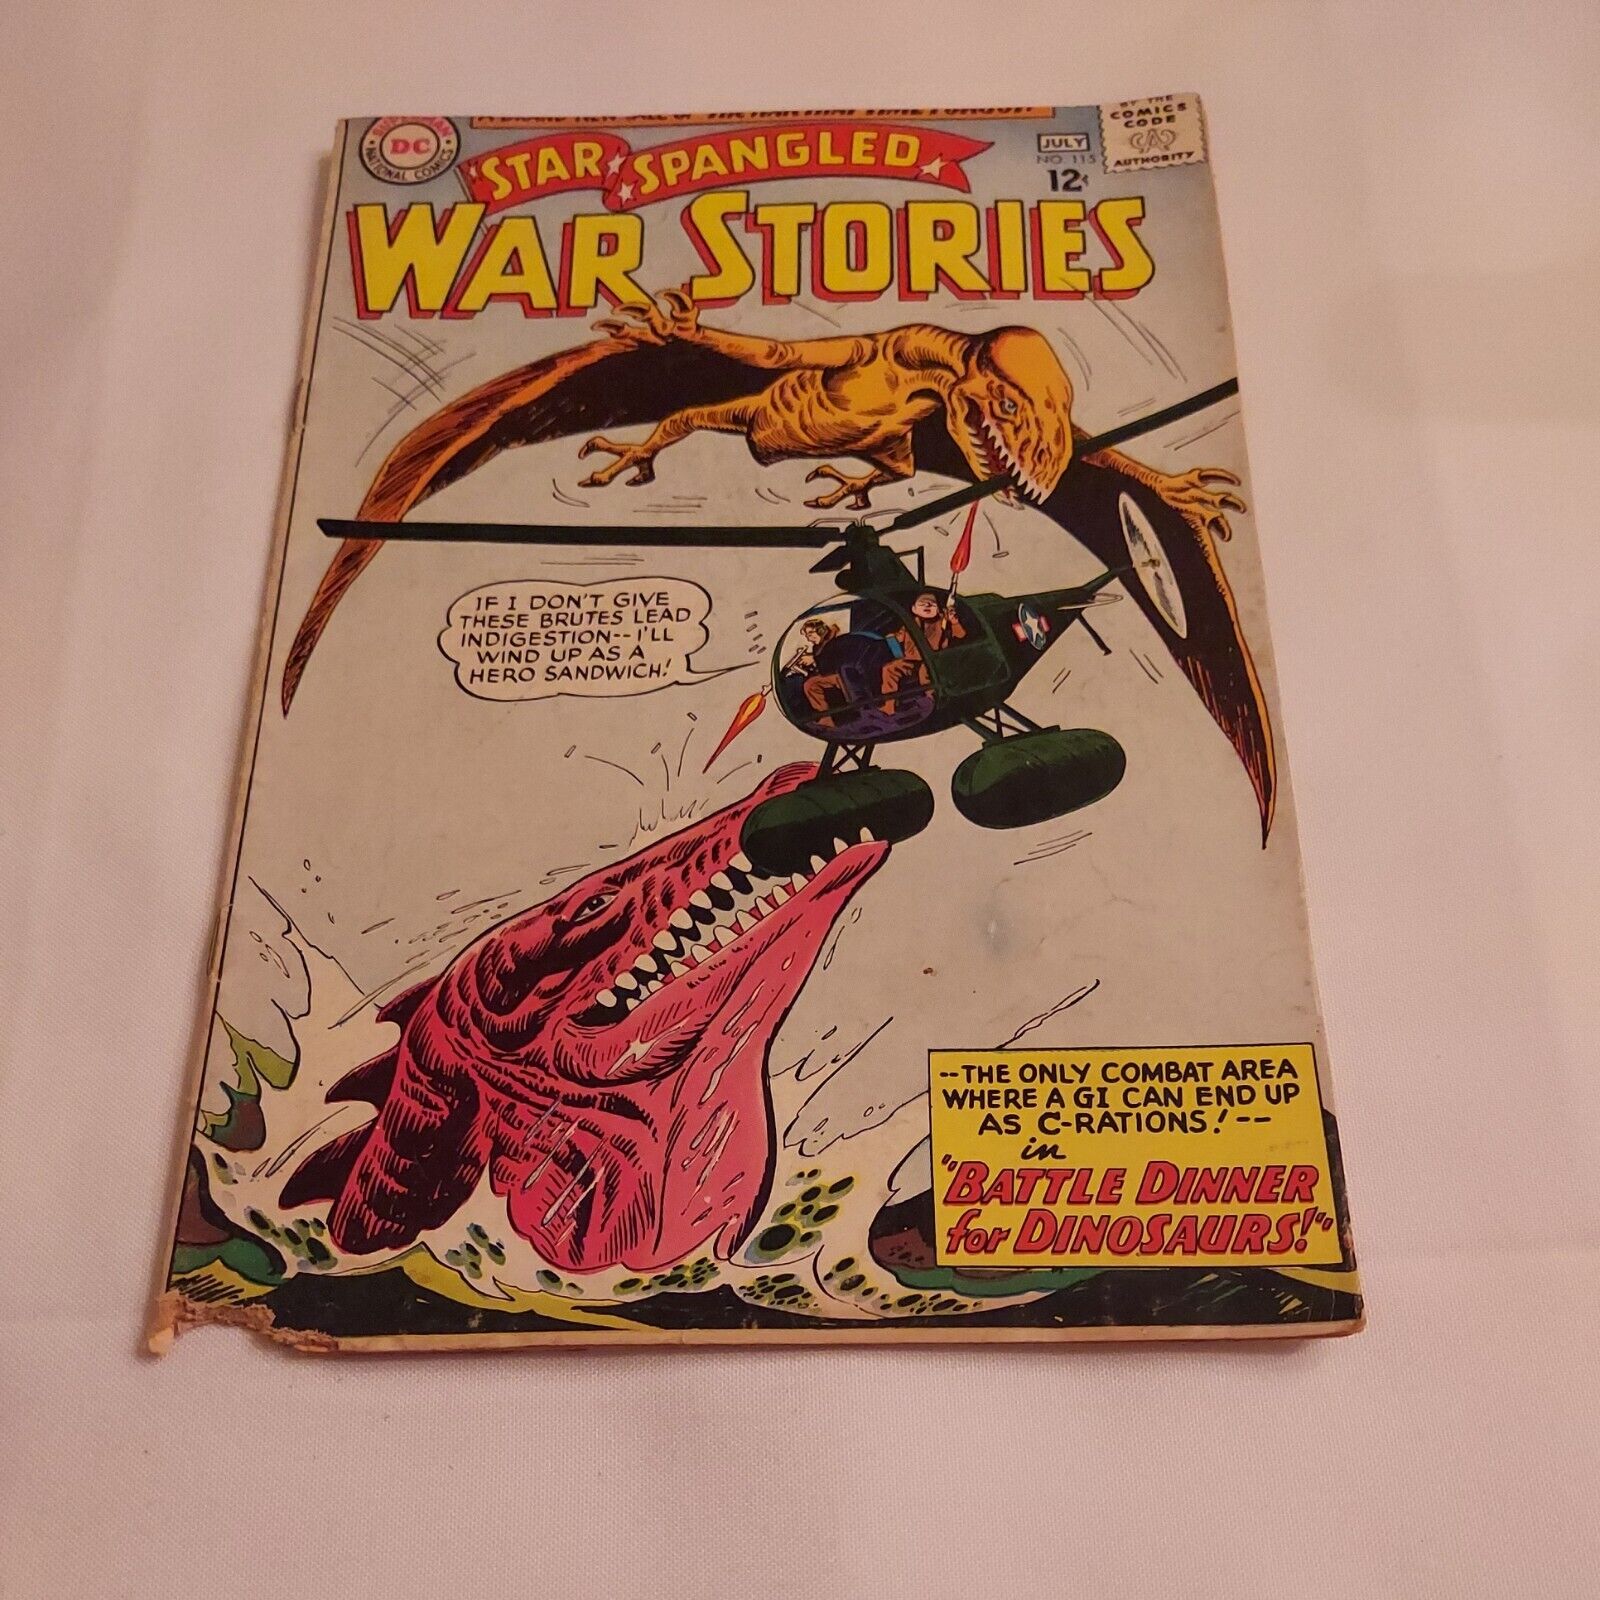 1964 June/July, Star Spangled War Stories Comic Book by National Comics No. 115